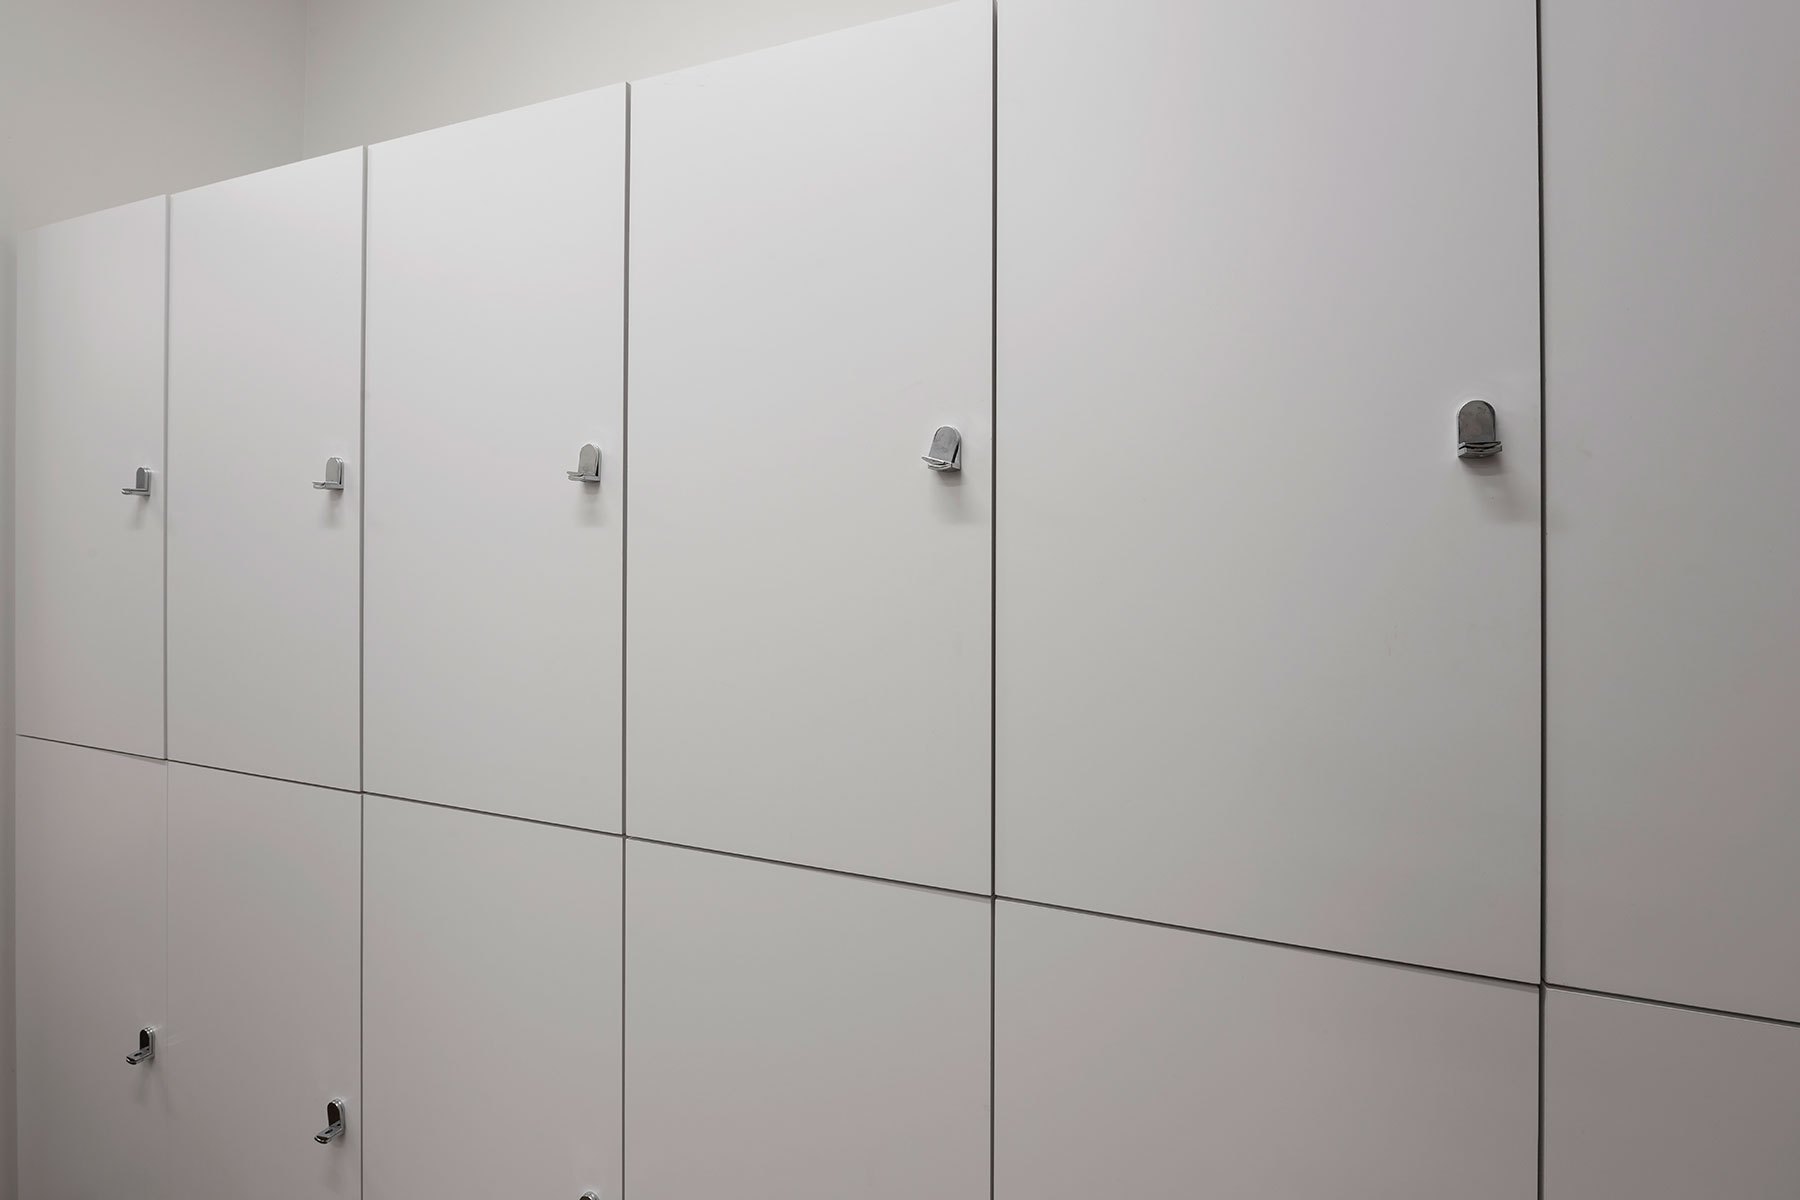 staff lockers - Advanced Skin & MOHS Surgery Clinics, Morton Grove Custom Home. America's Custom Home Builders: New Construction, Remodeling, Restoration Services. Residential and Commercial.